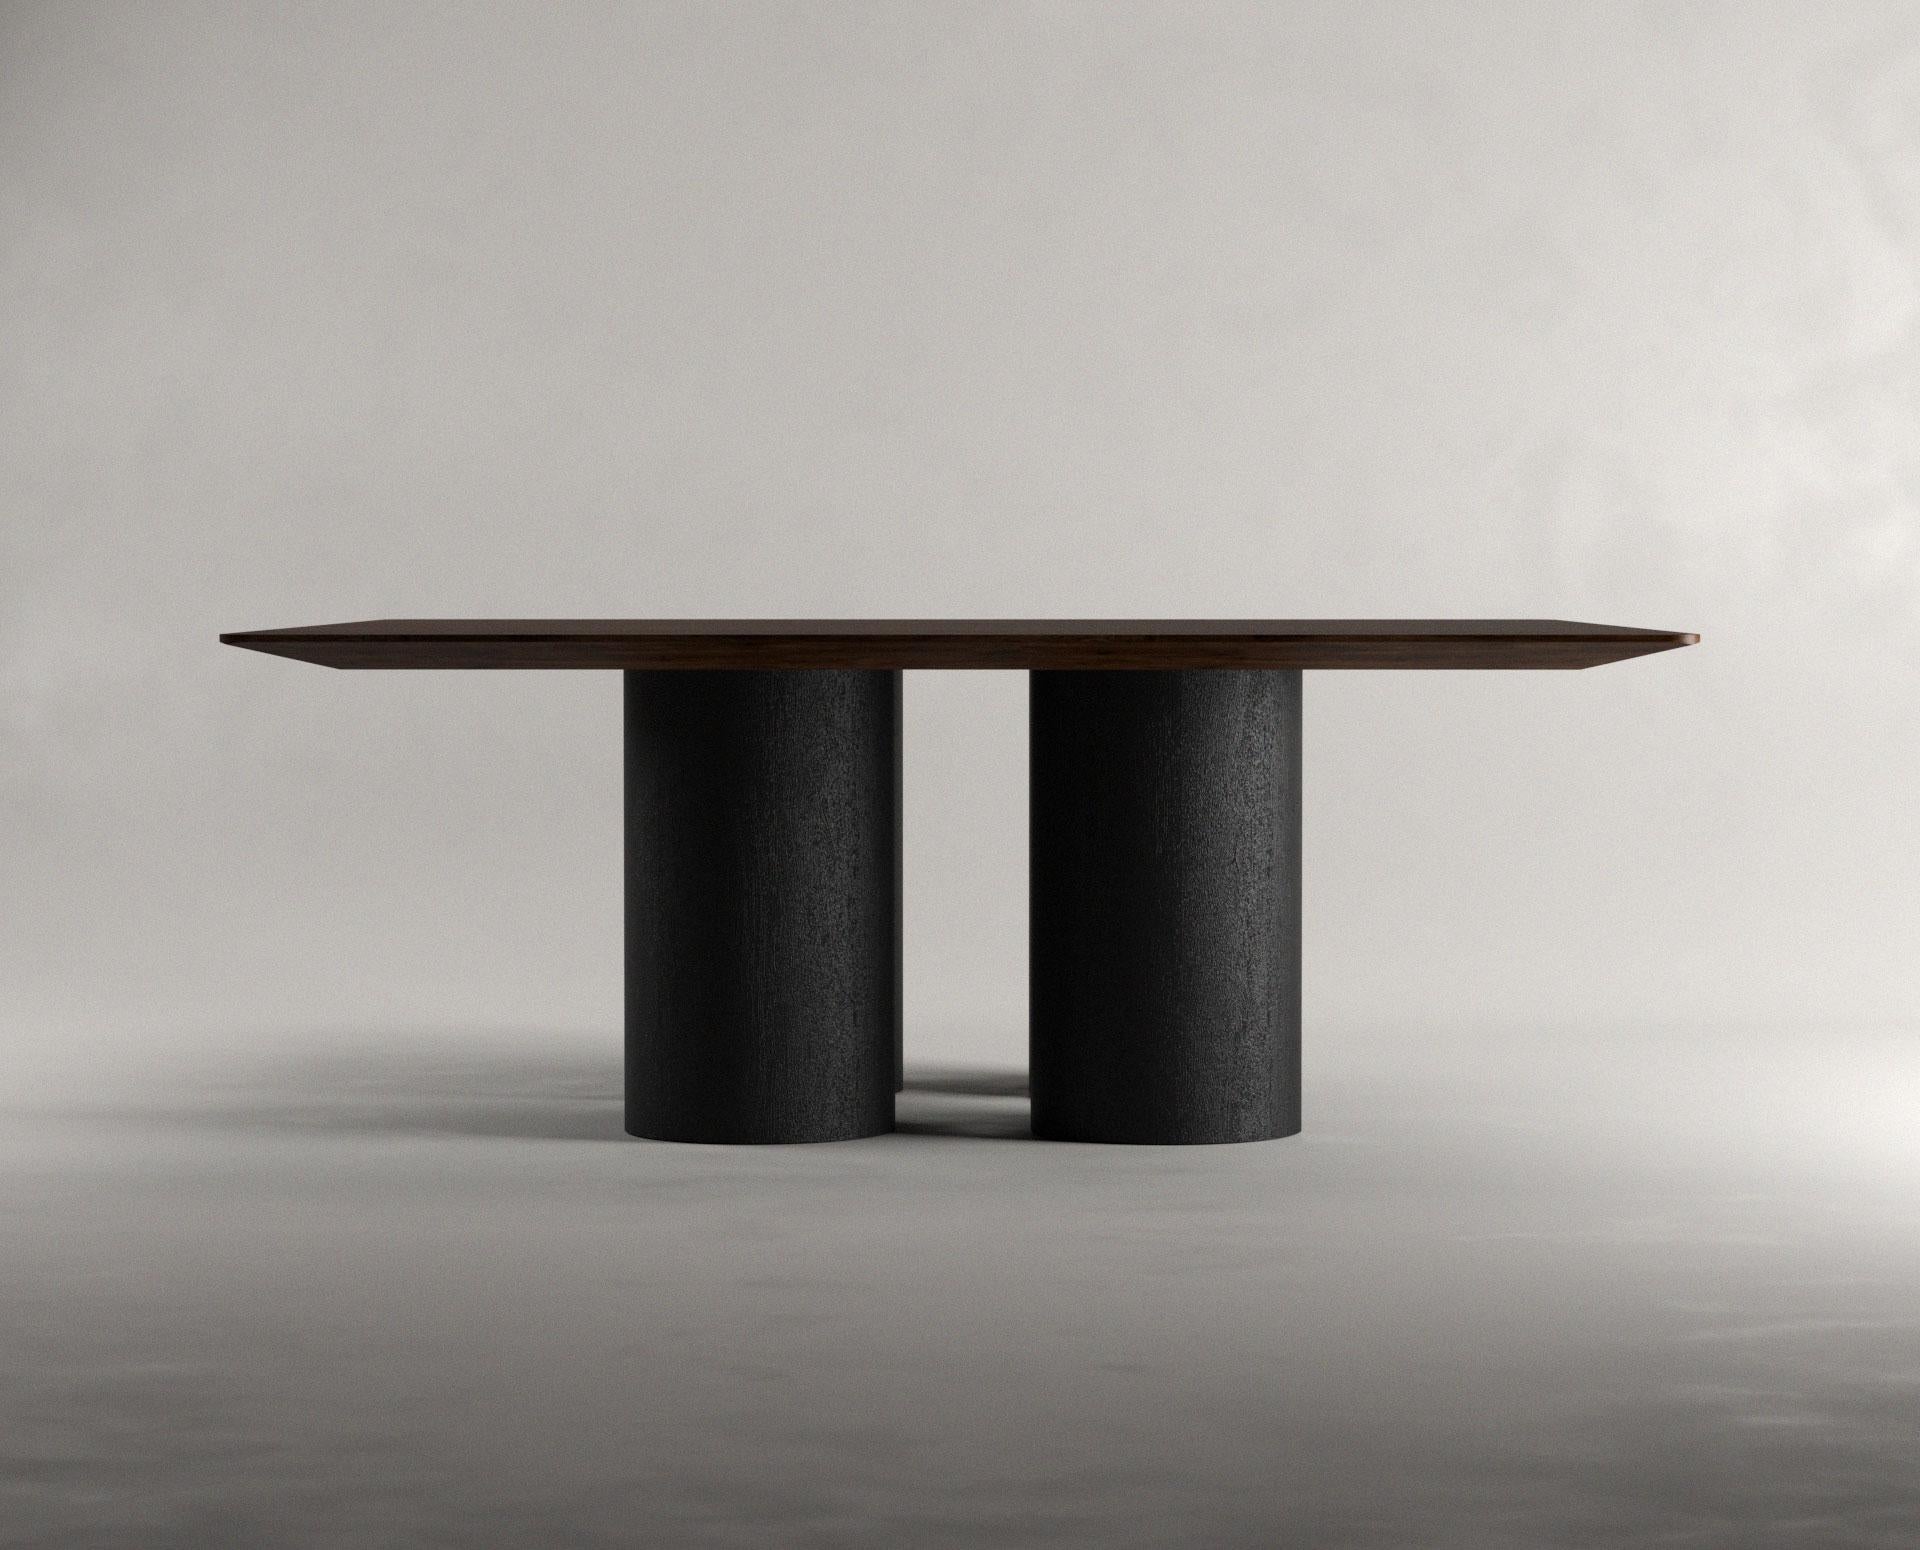 Post-Modern Pier Square Dining Table by Siete Studio